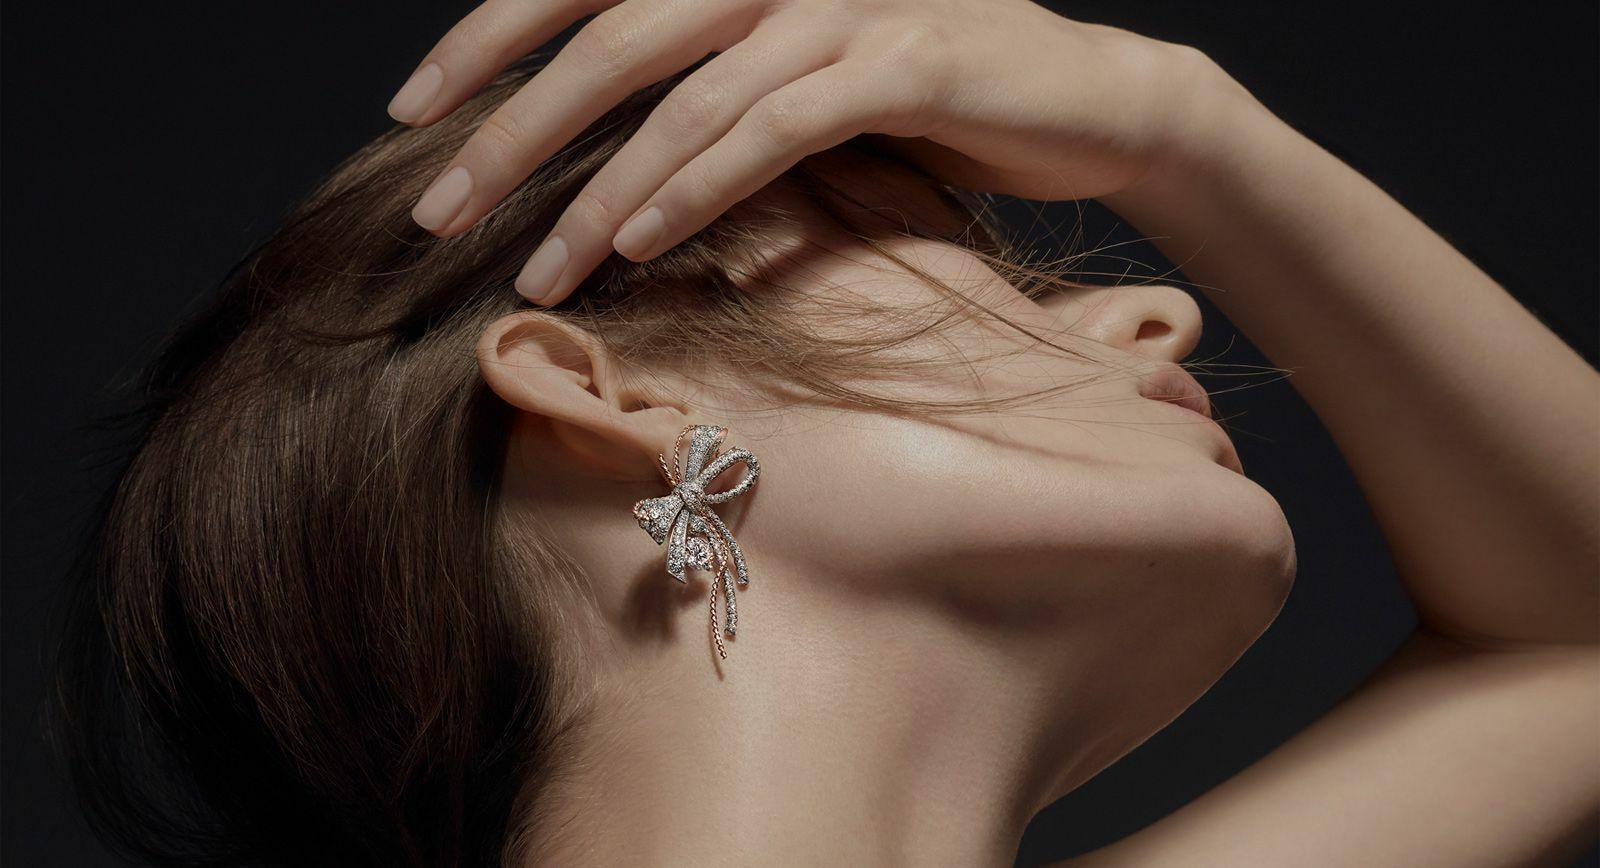 The Cheek and Tenderness of the Chaumet Insolence Collection